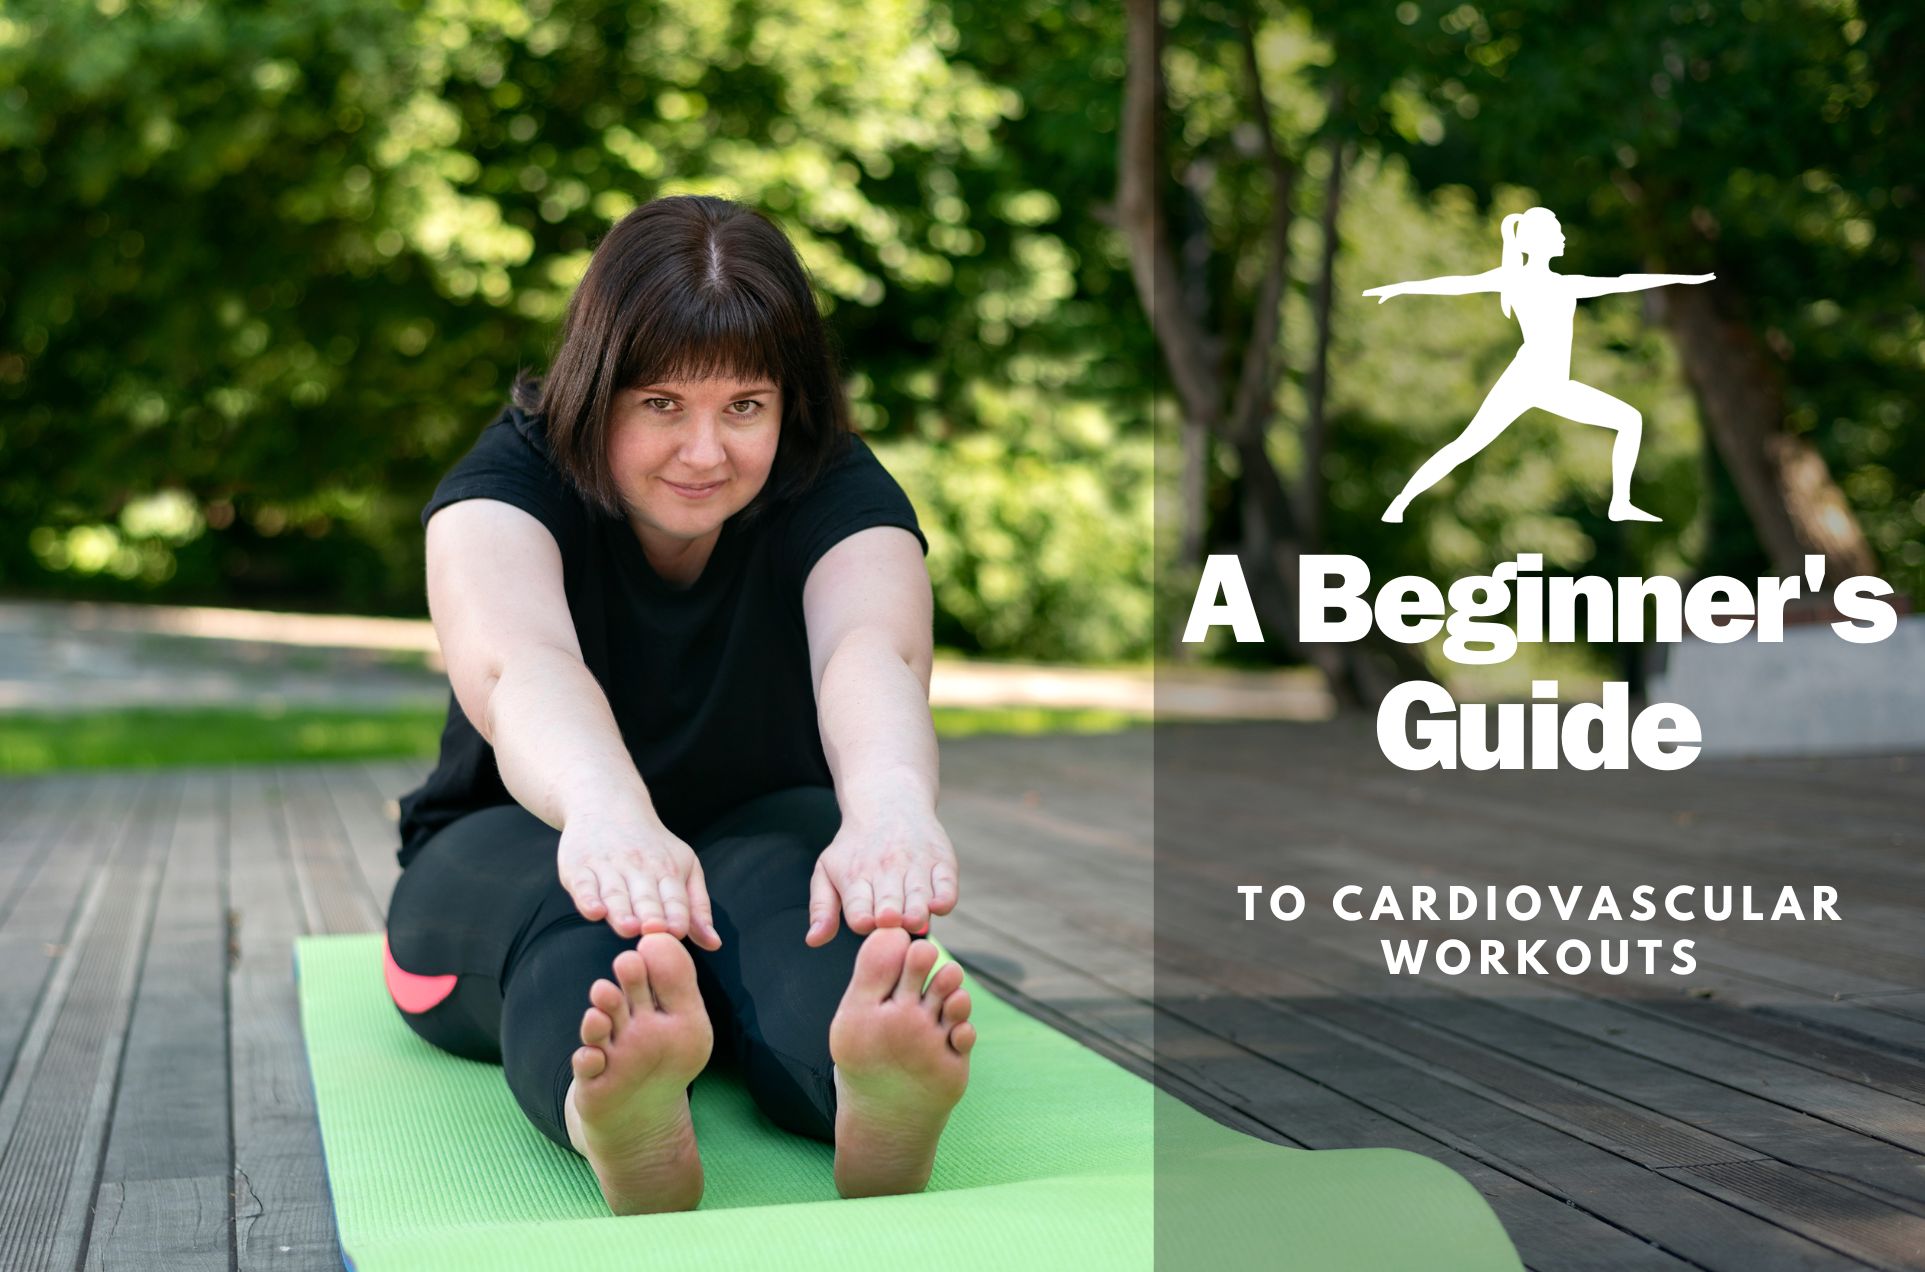 A Beginner's Guide to Cardiovascular Workouts